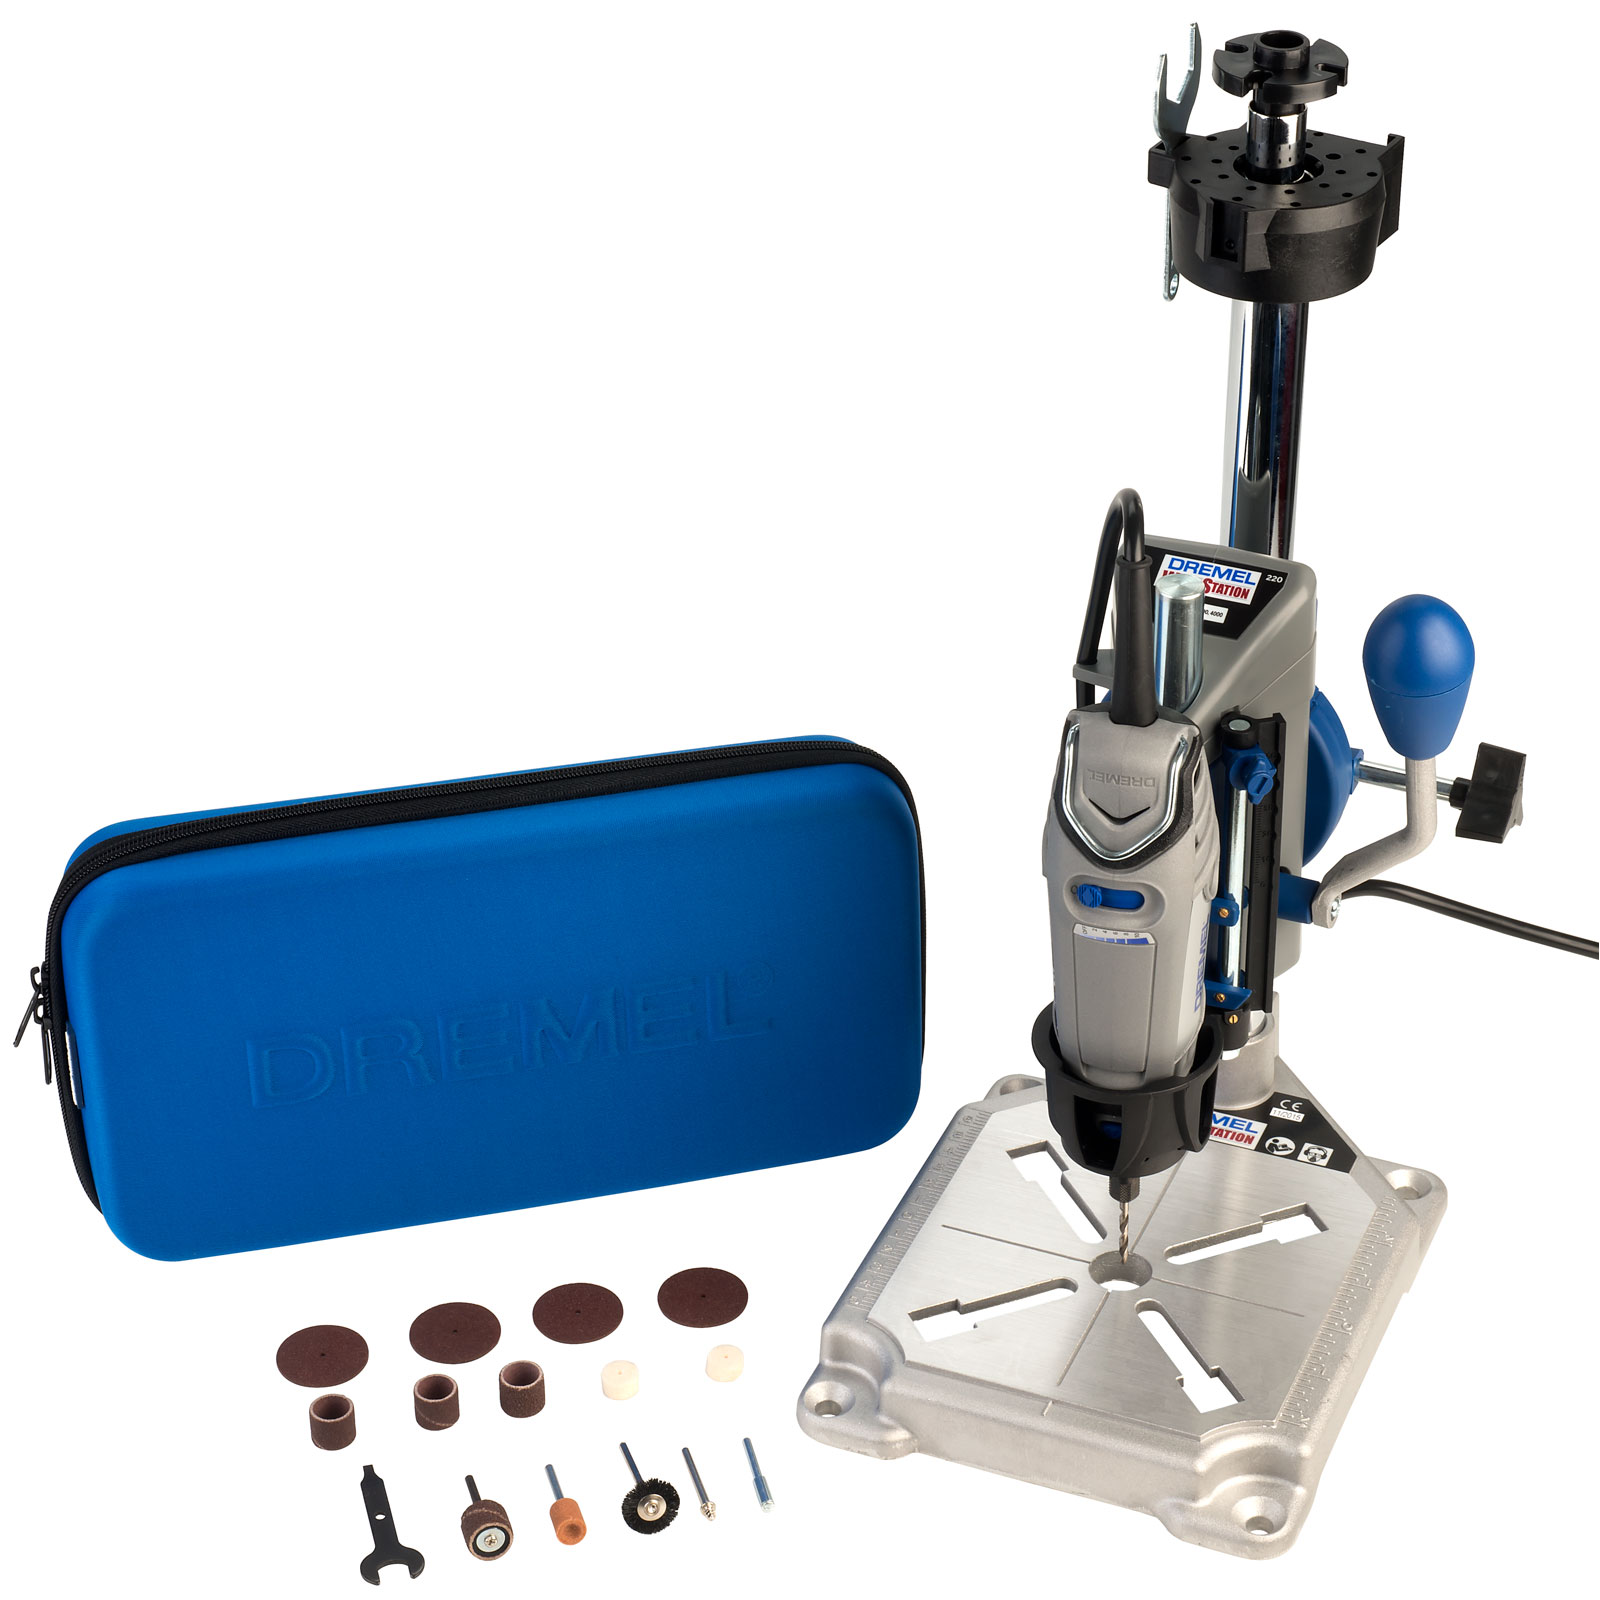 3000-15 EZ Series Multi-Tool and Dremel 220 Workstation Drill Stand | Rapid Online